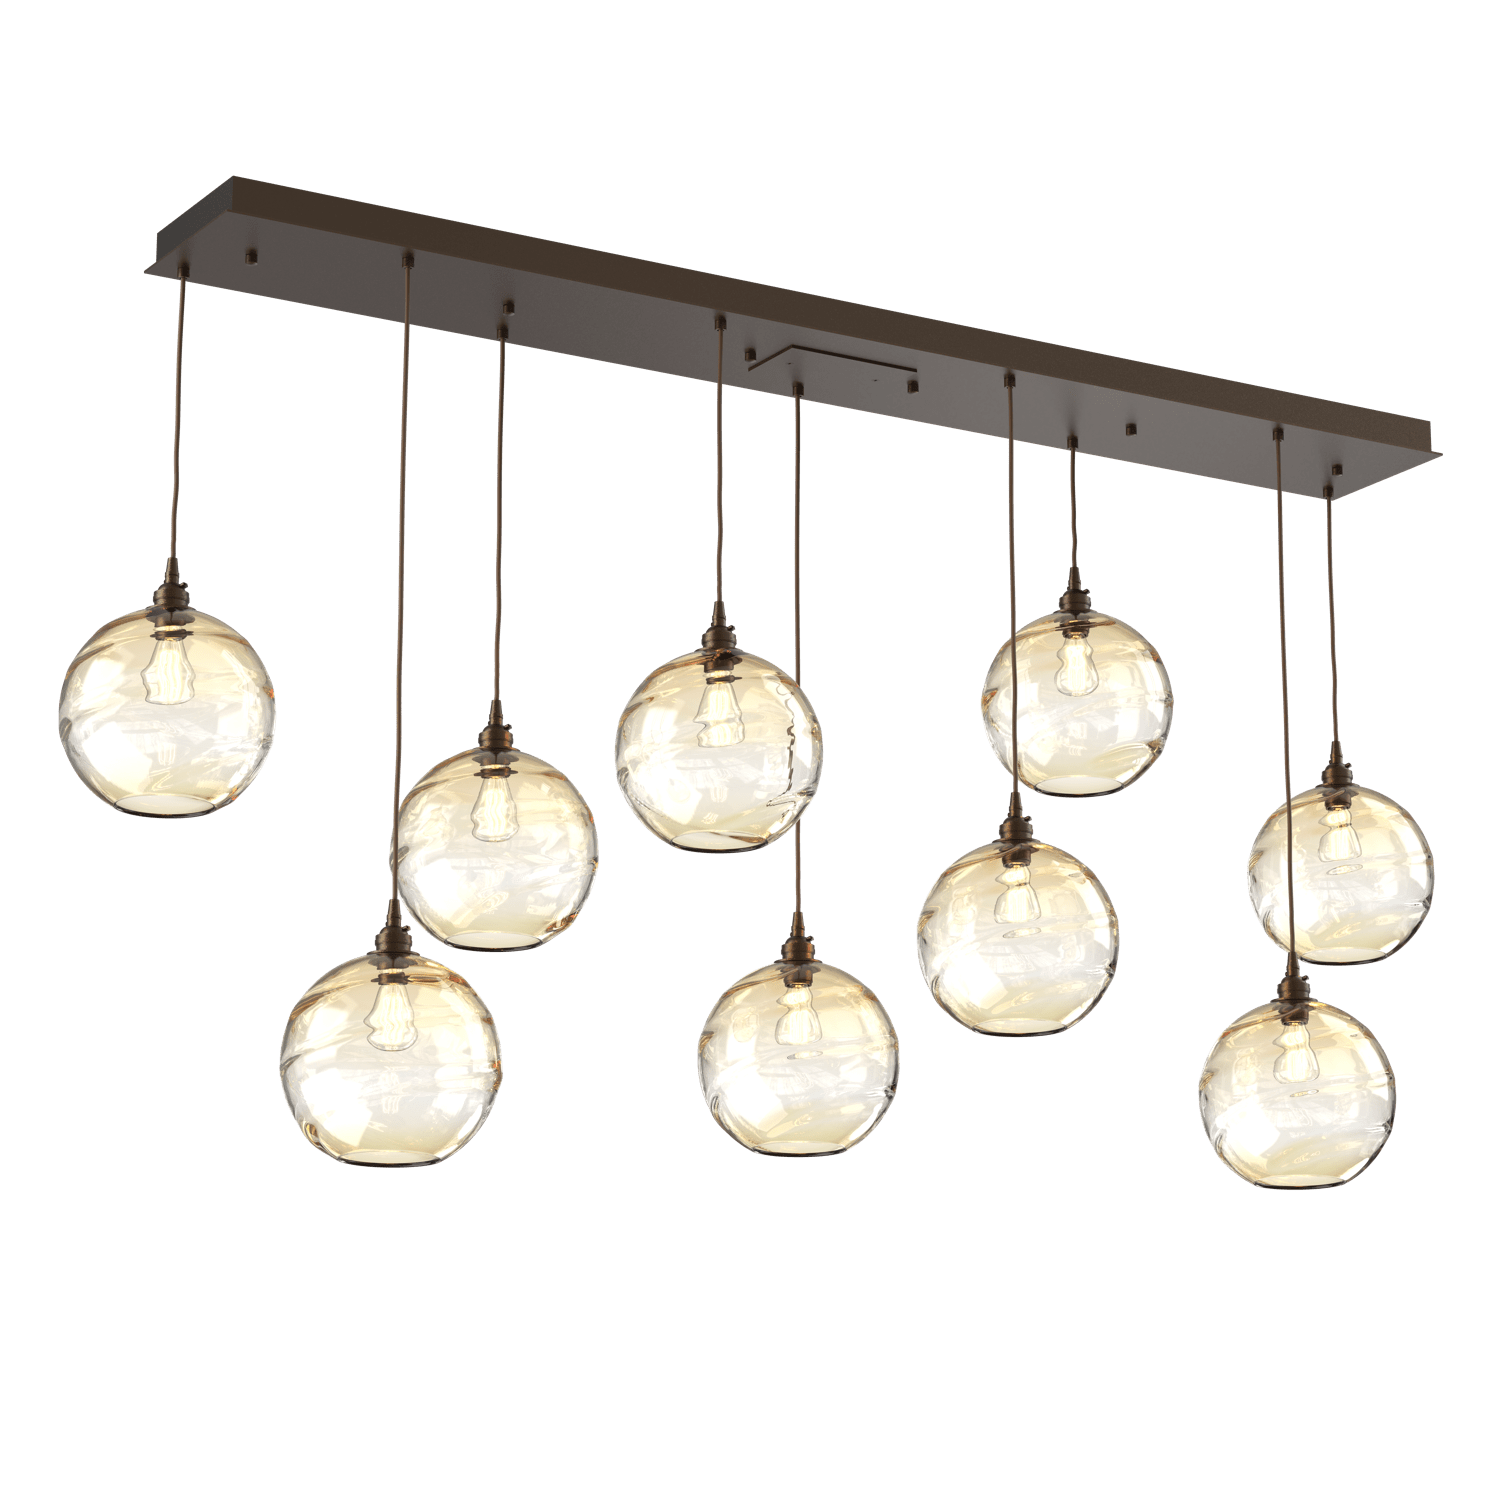 PLB0047-09-FB-OA-Hammerton-Studio-Optic-Blown-Glass-Terra-9-light-linear-pendant-chandelier-with-flat-bronze-finish-and-optic-amber-blown-glass-shades-and-incandescent-lamping